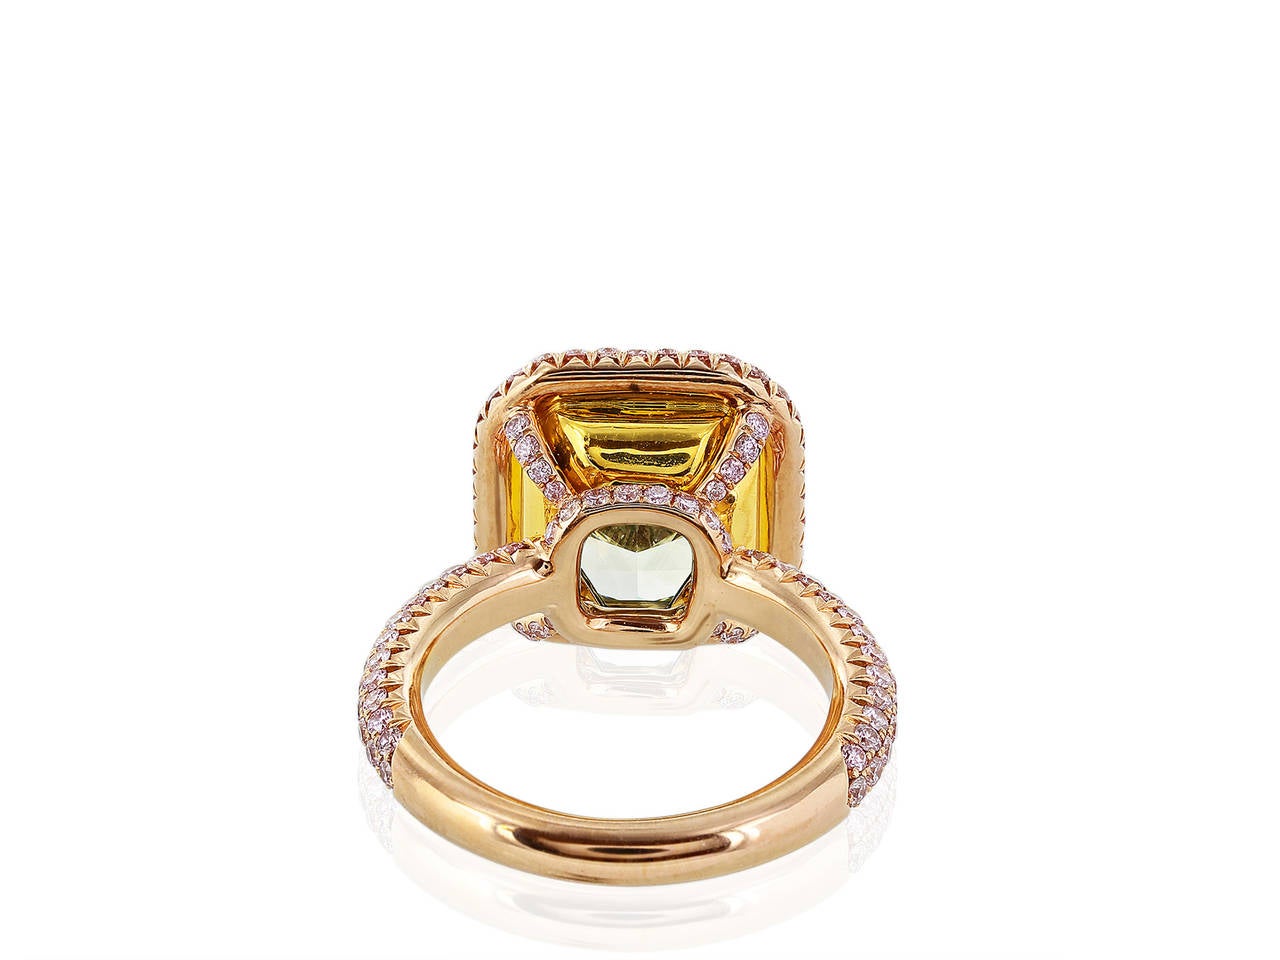 18 karat pink gold ring consisting of rectangular radiant cut diamond weighing 7.08 carats having a color and clarity of Fancy intense Green-Yellow / VS2 with GIA certificate, the center stone is set with 175 full cut fancy pink diamonds having a